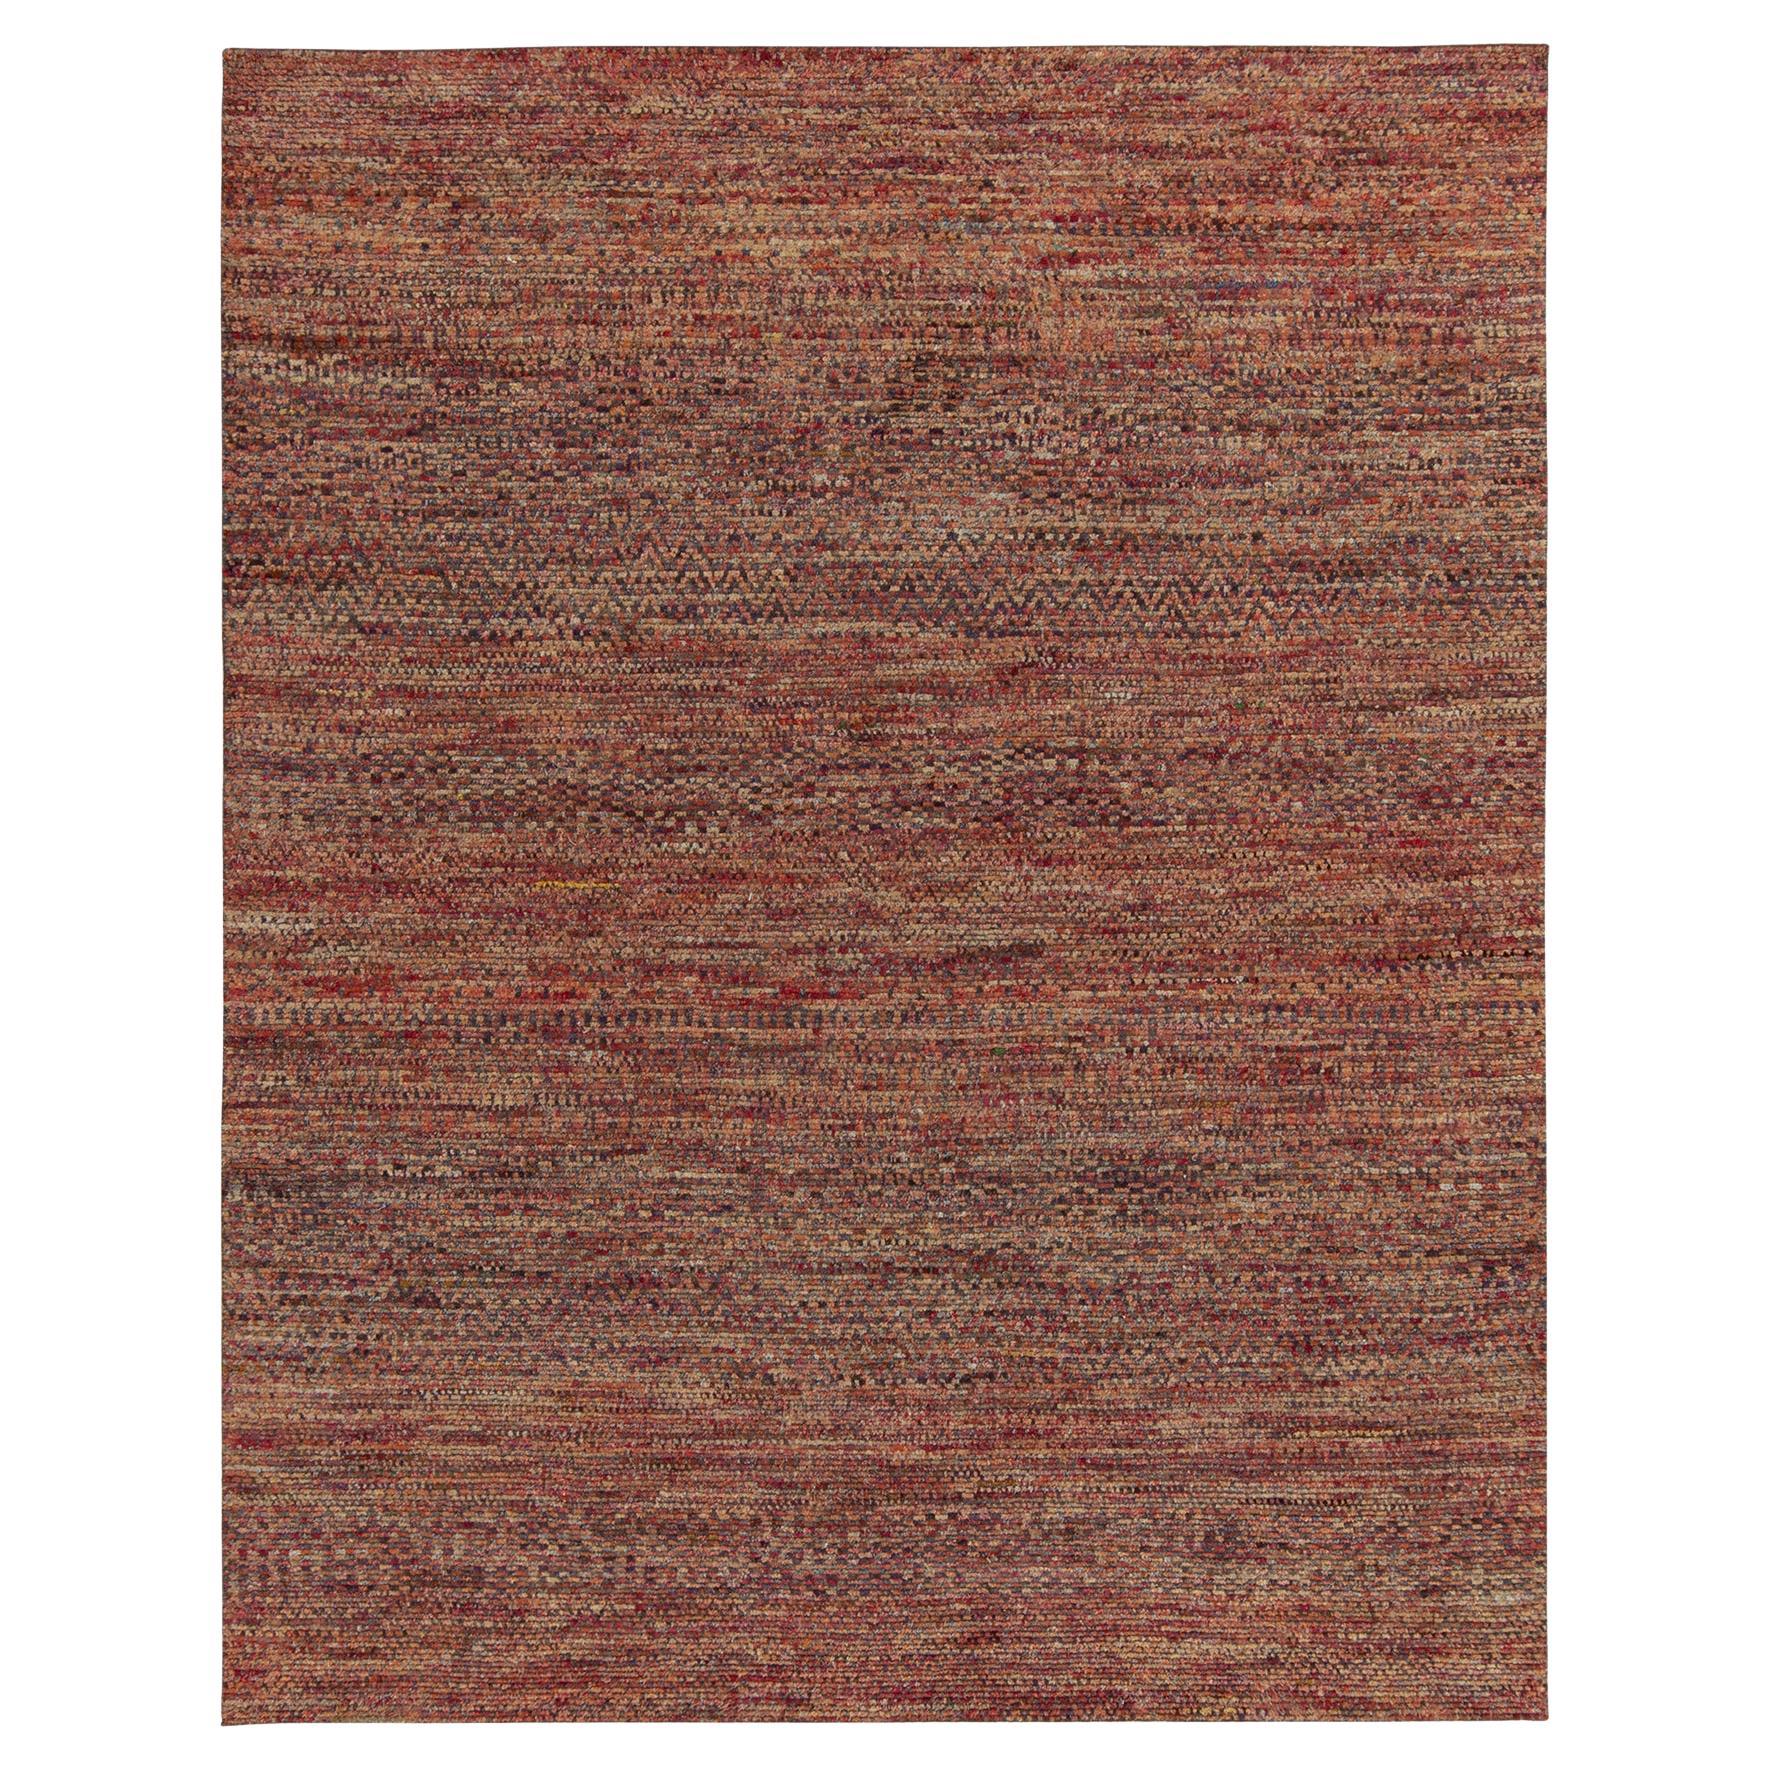 Hand-knotted in luxurious quality silk, a bold 8x10 contemporary rug with exceptional textural element and visual depth. This particular modern design marries striae with subdued geometric patterns in luscious reds, browns, and other warm and robust